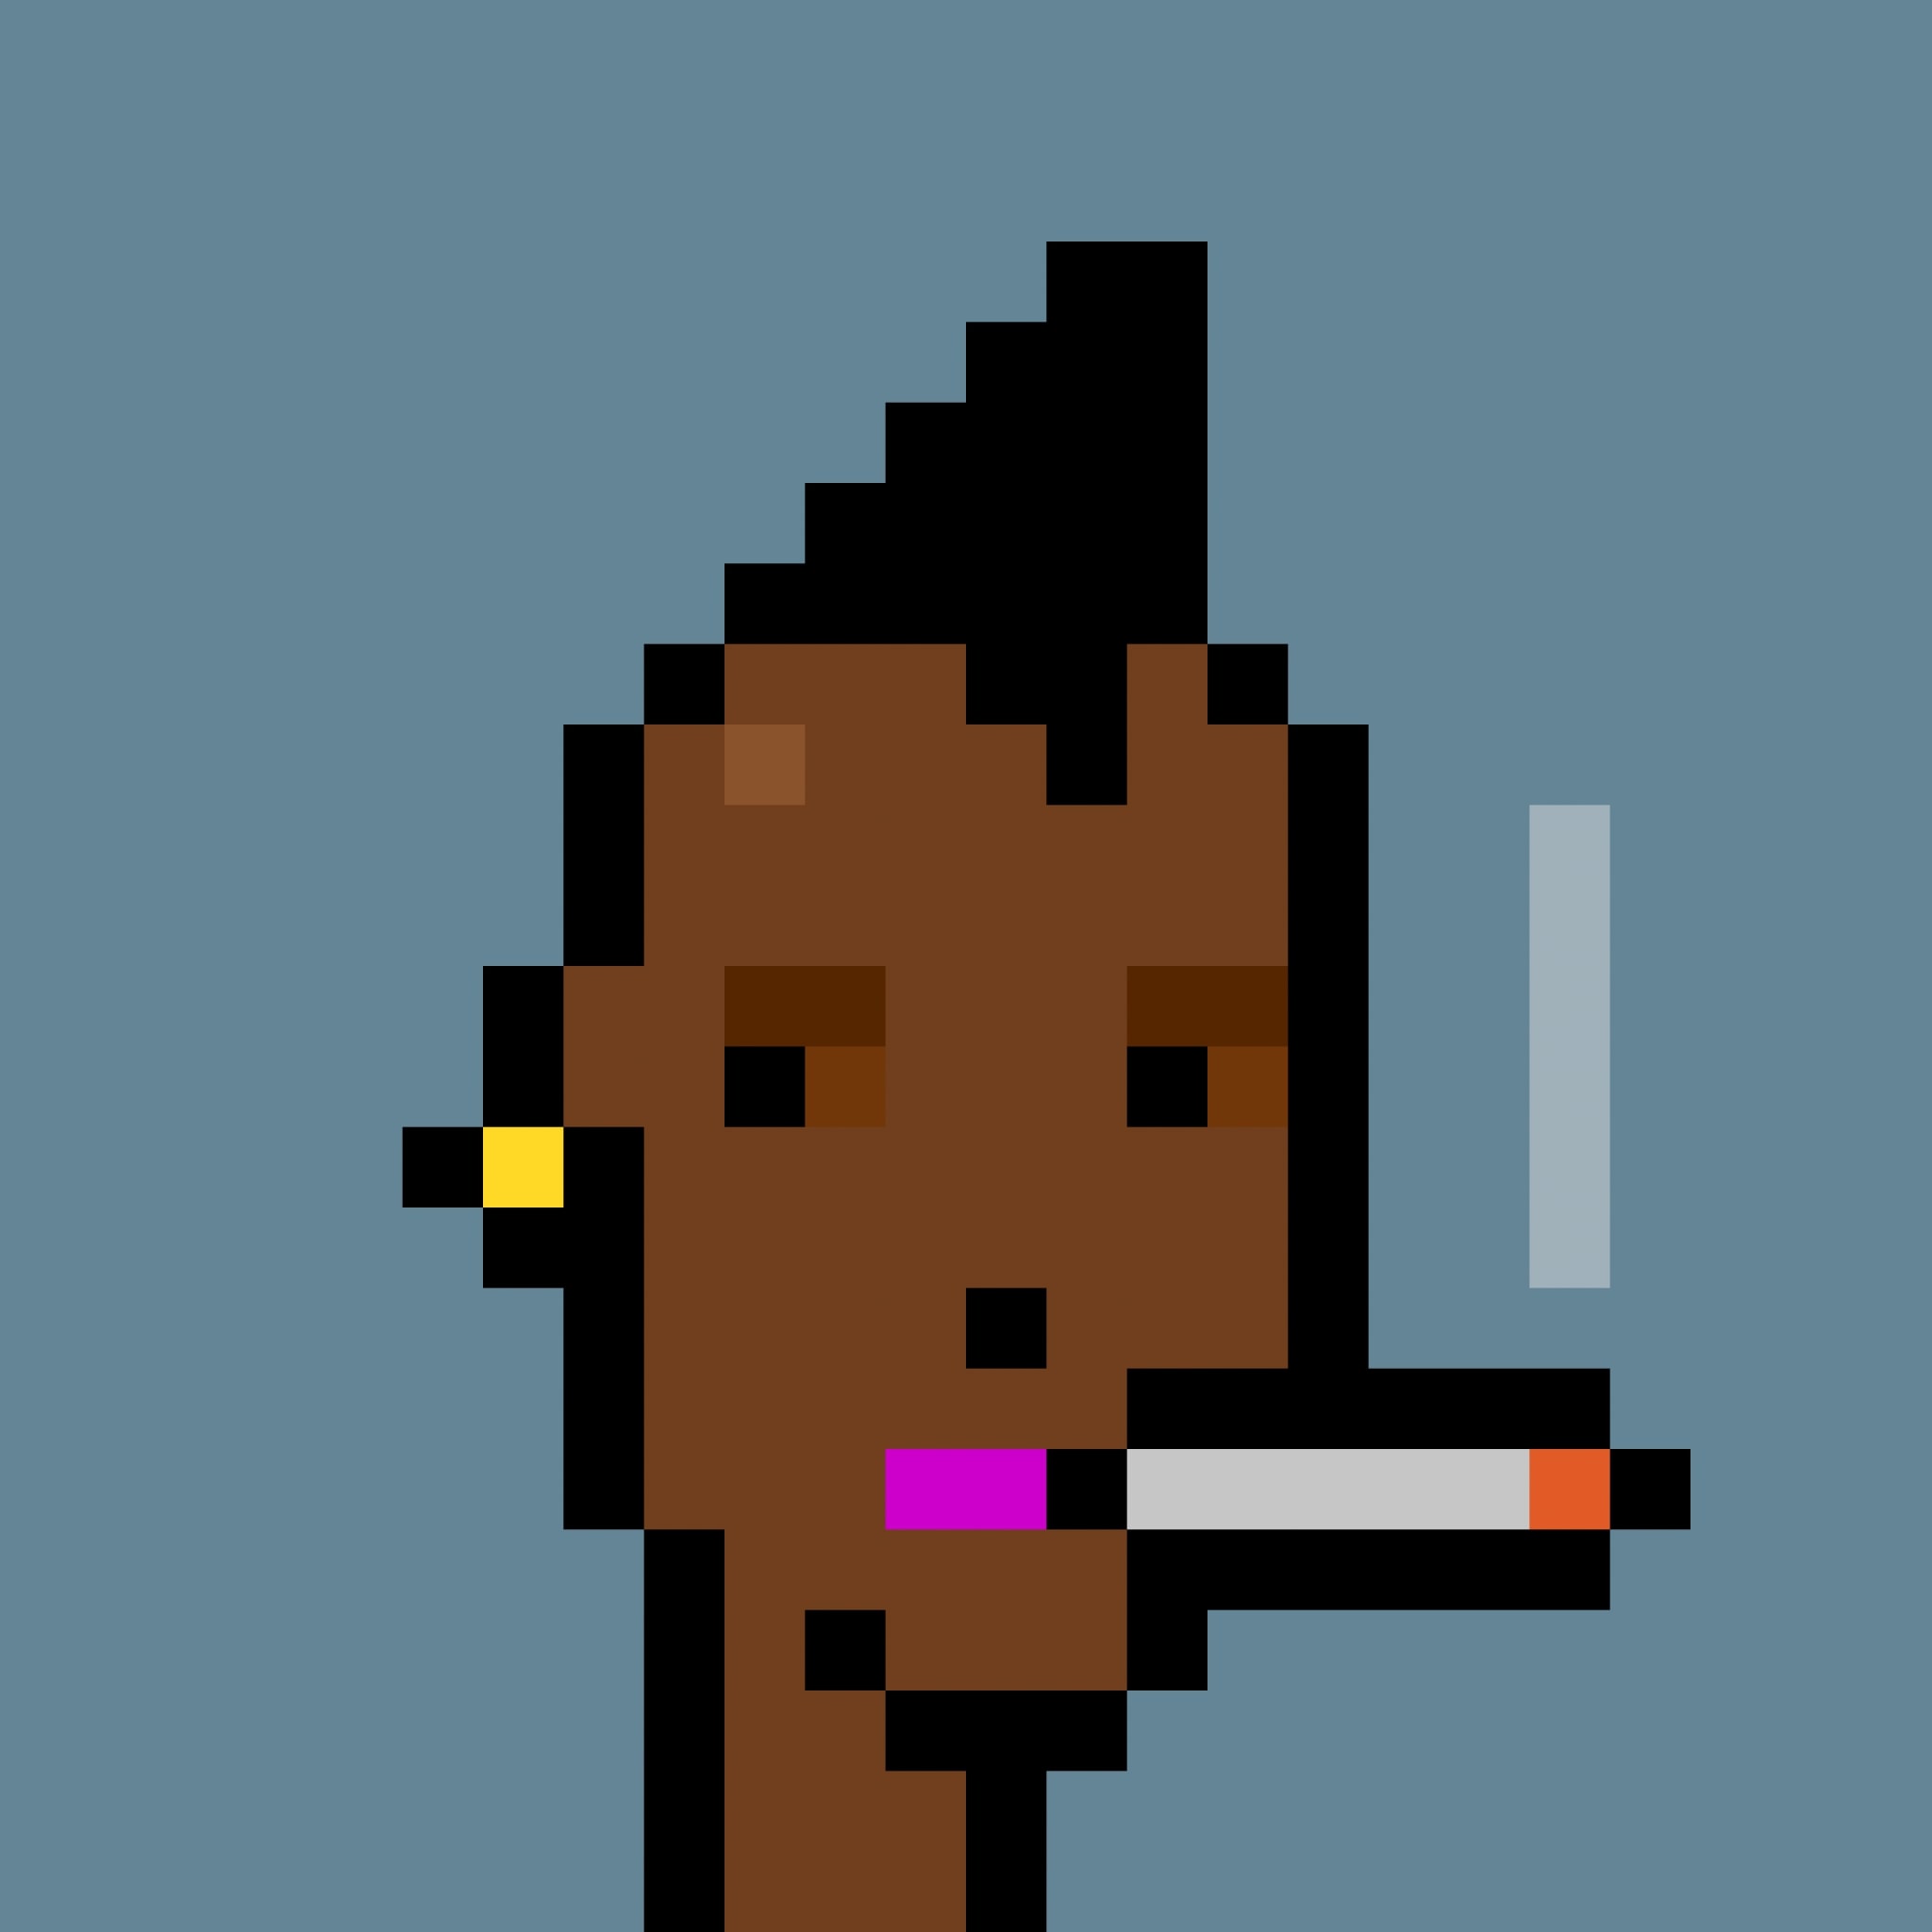 A pixelated drawing of a dark skinned person with a black mohawk smoking a cigarette.